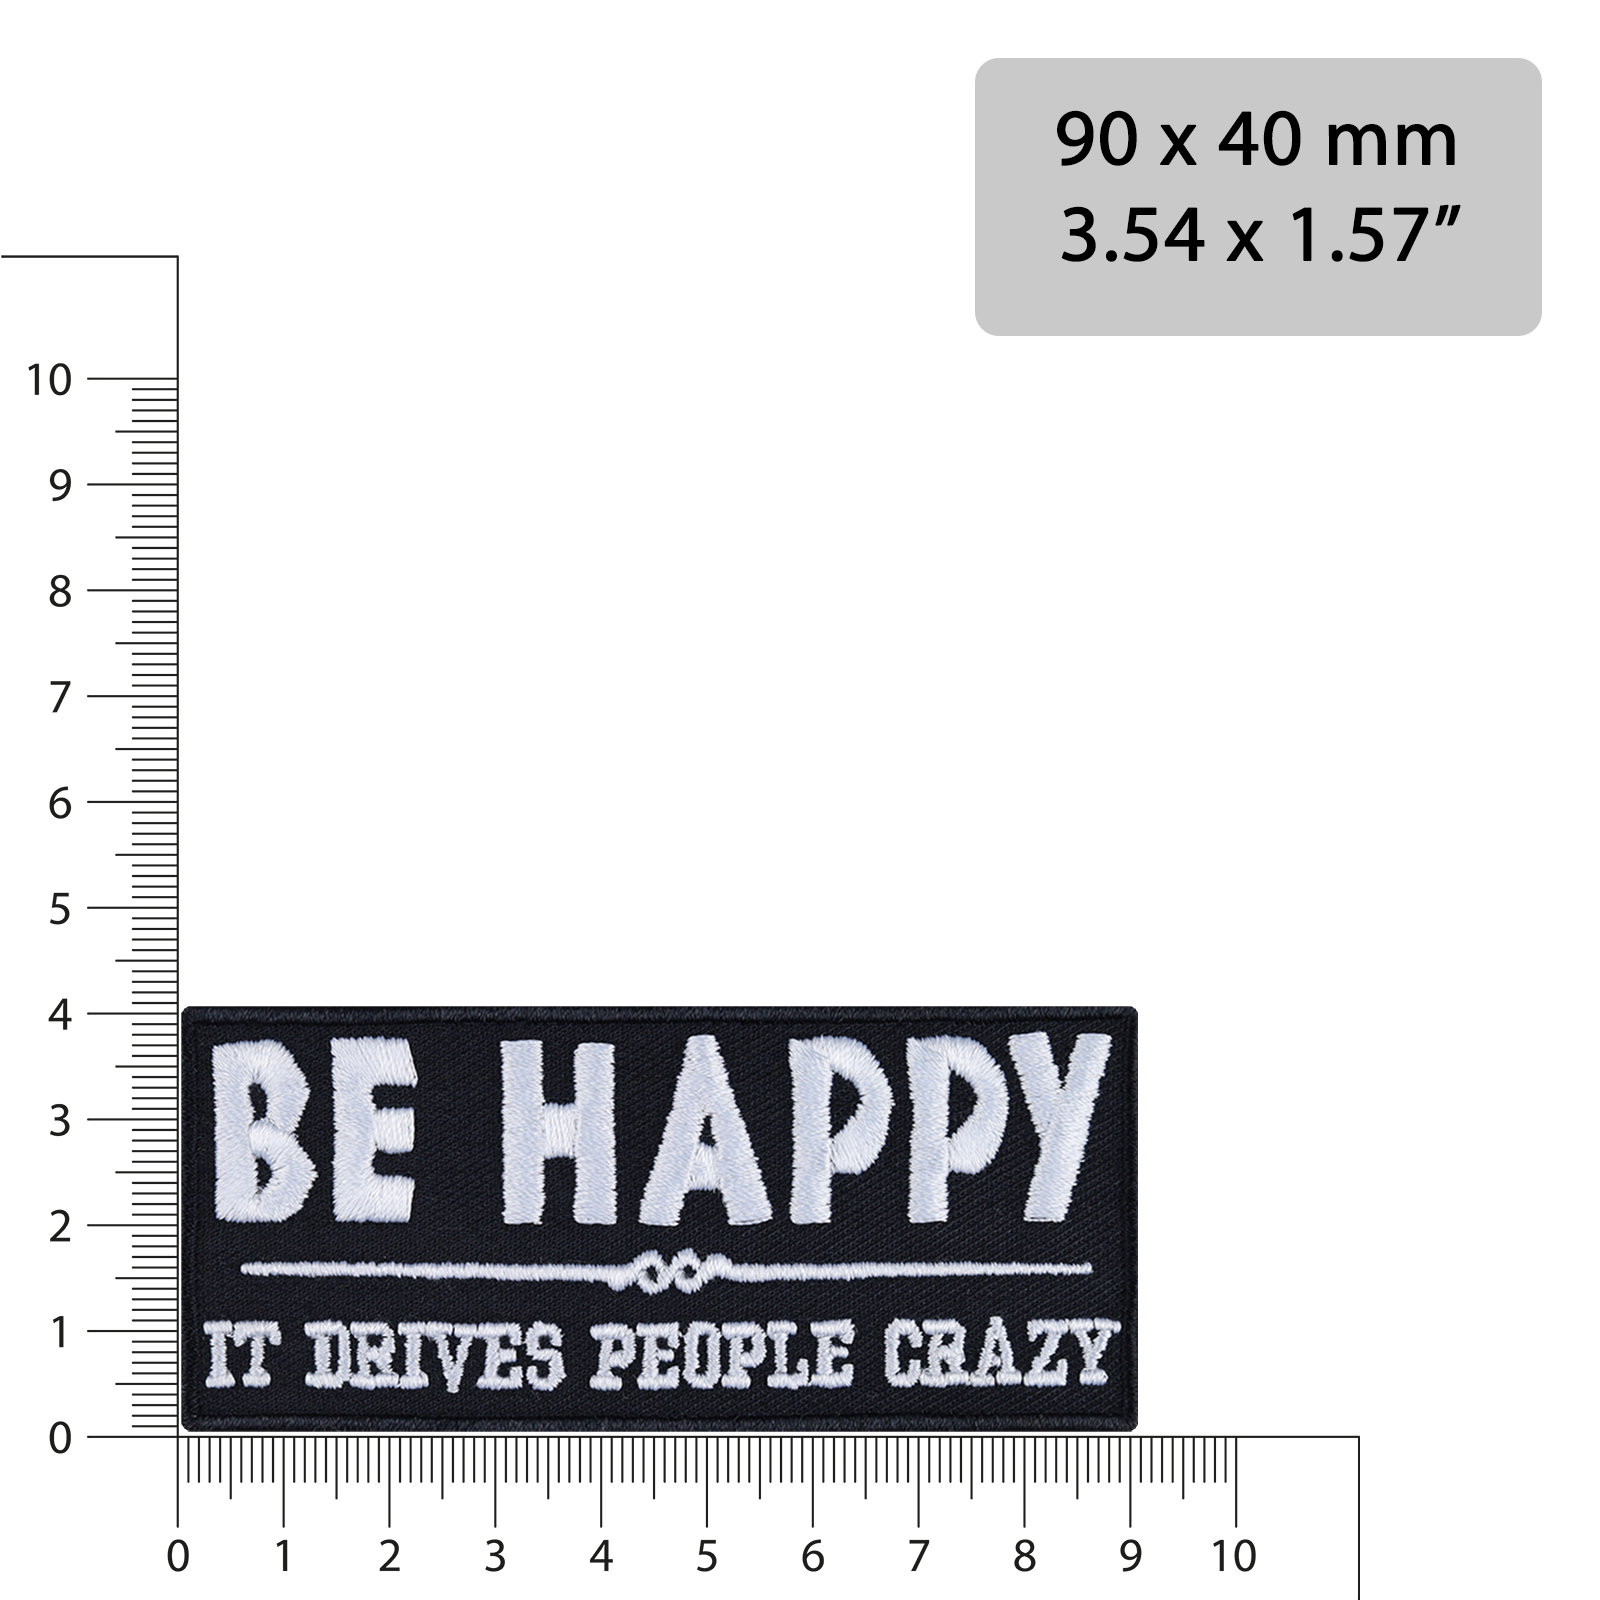 Be happy it drives people crazy - Patch